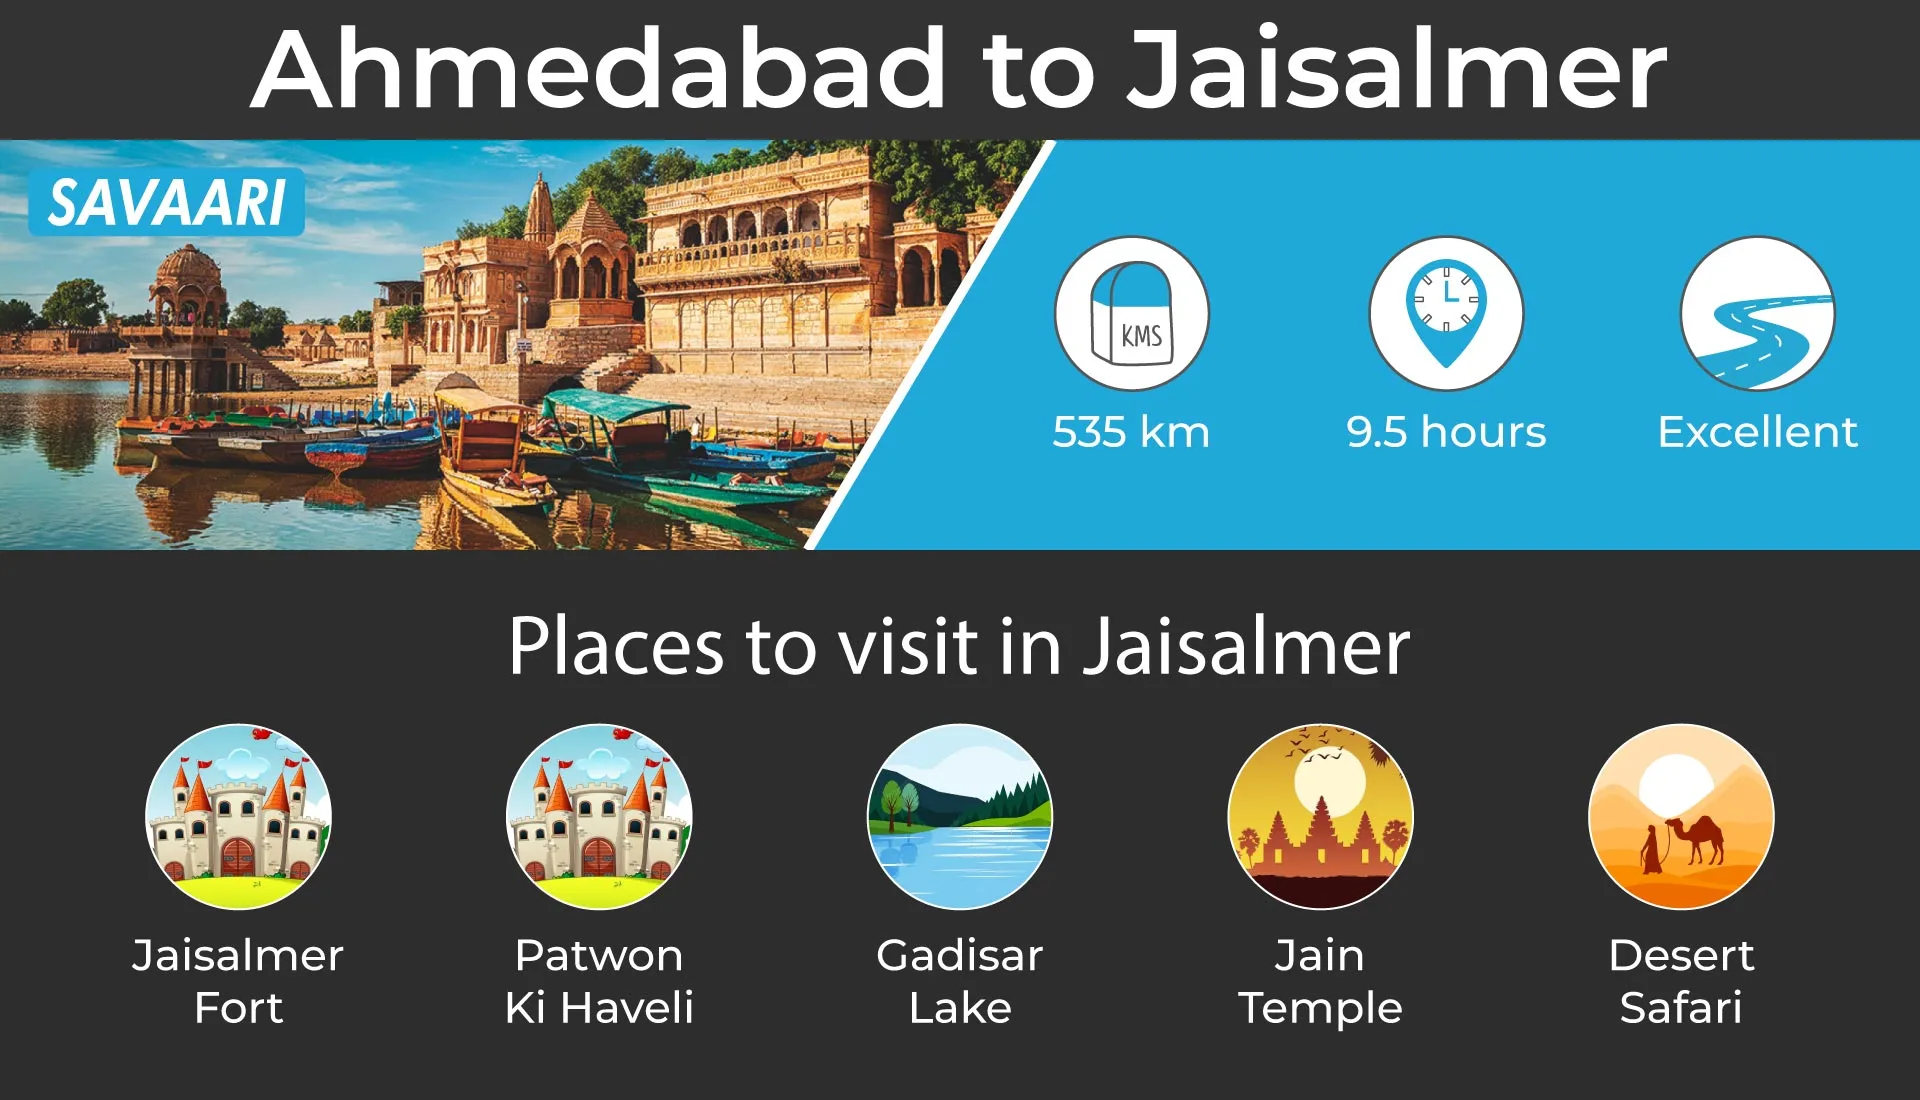 Places to visit near Ahmedabad by road - Jaisalmer 